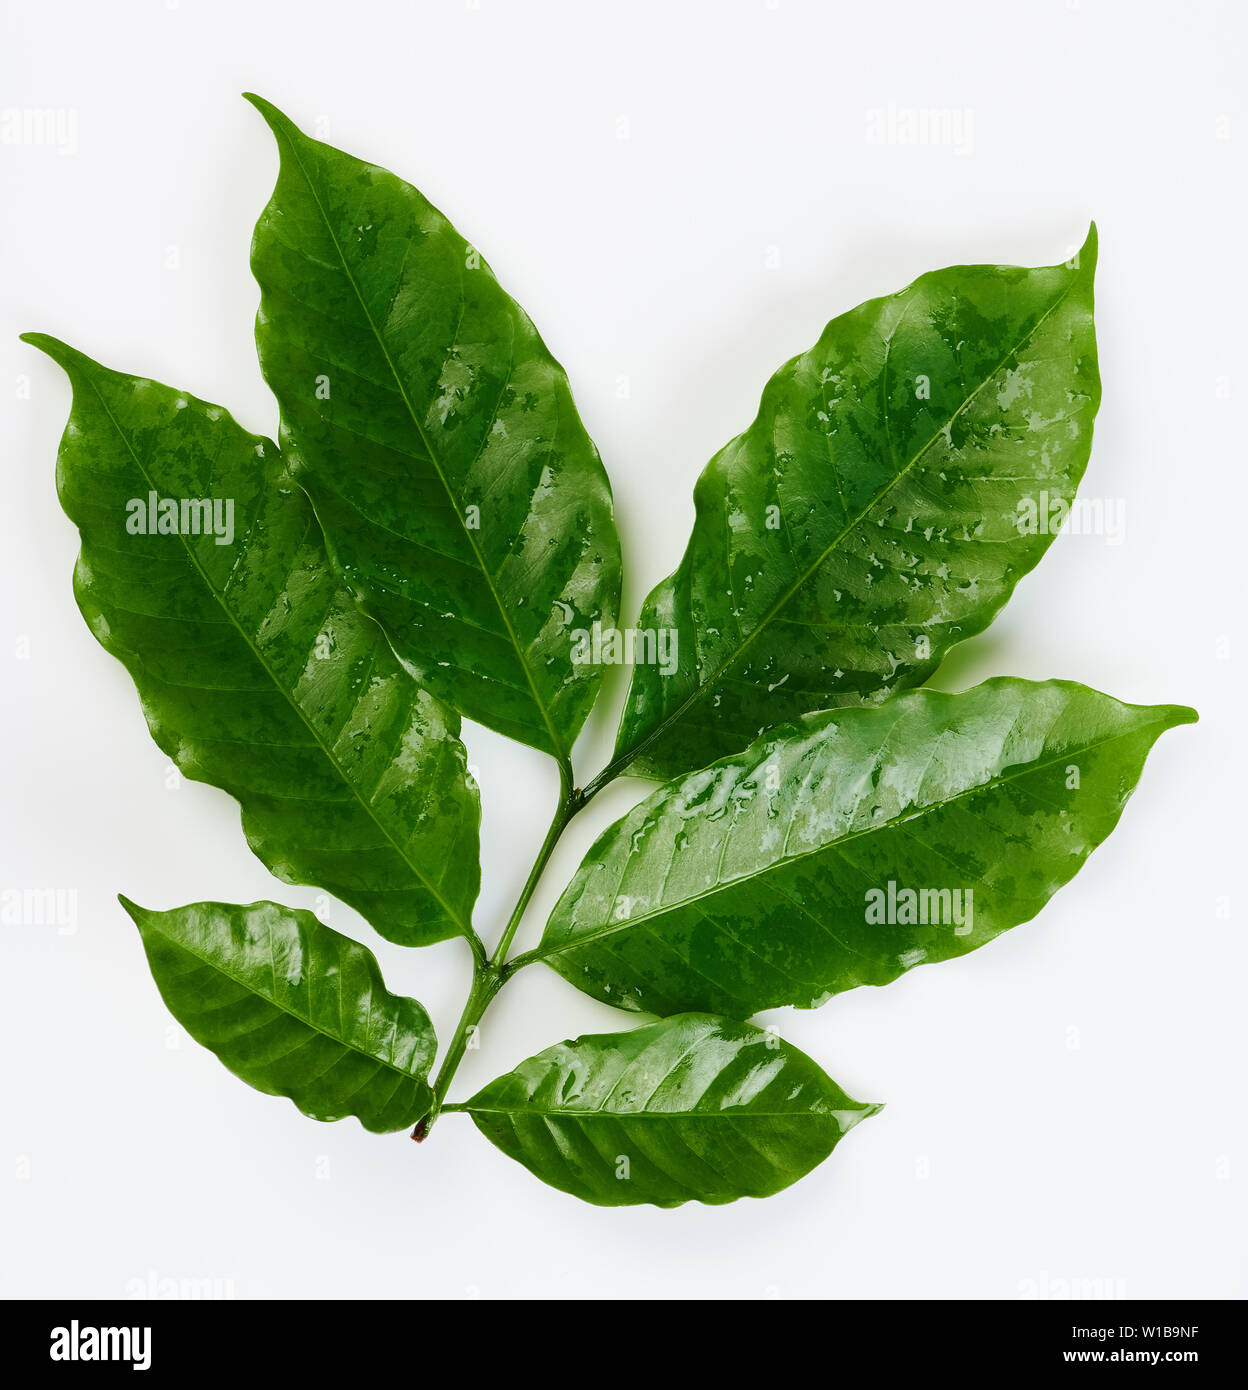 Wet green coffee leafs isolated on white background Stock Photo